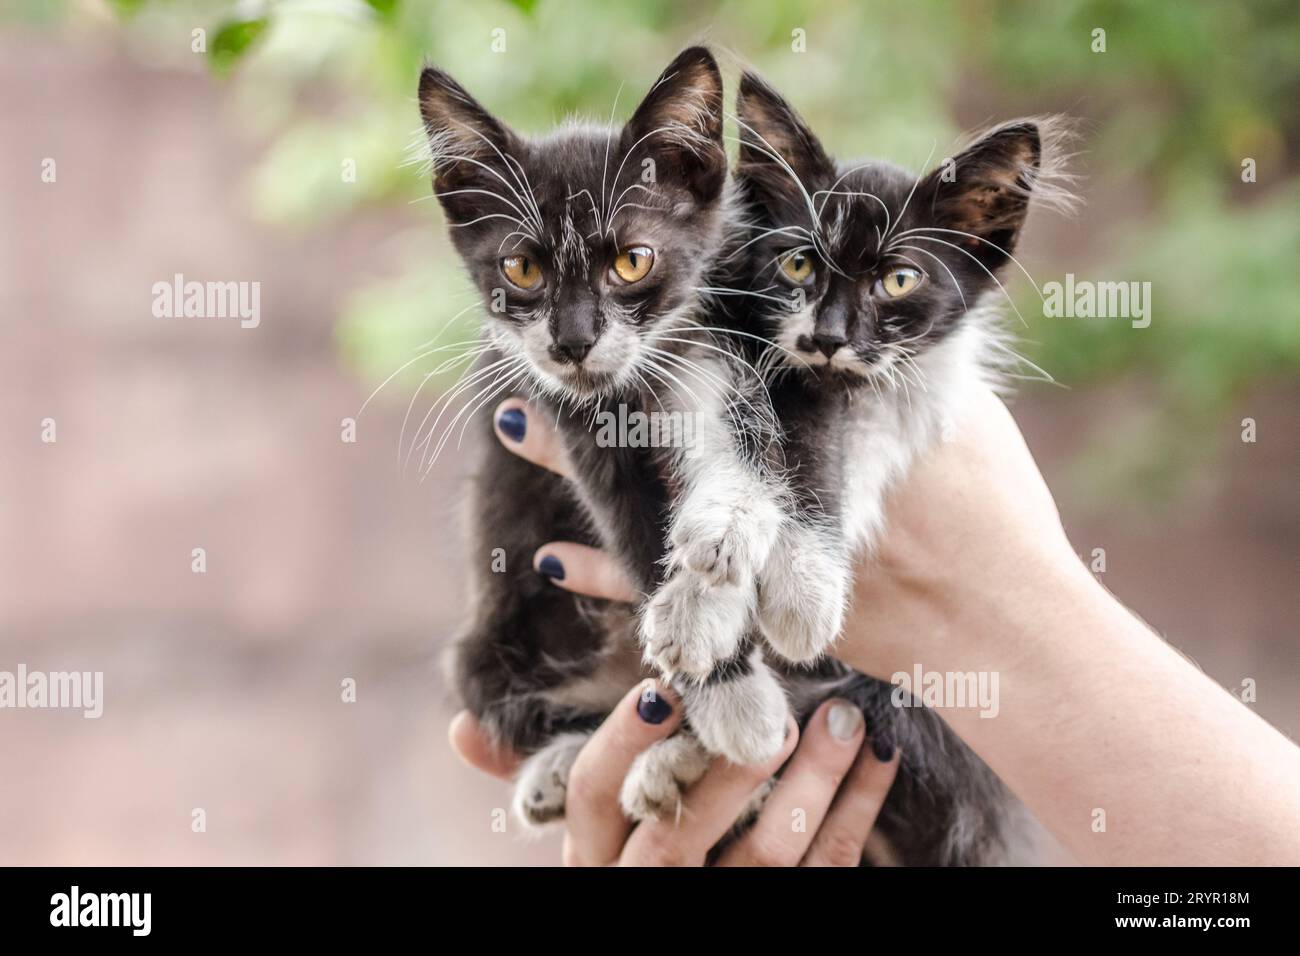 Two black and white kittens in human hands Stock Photo